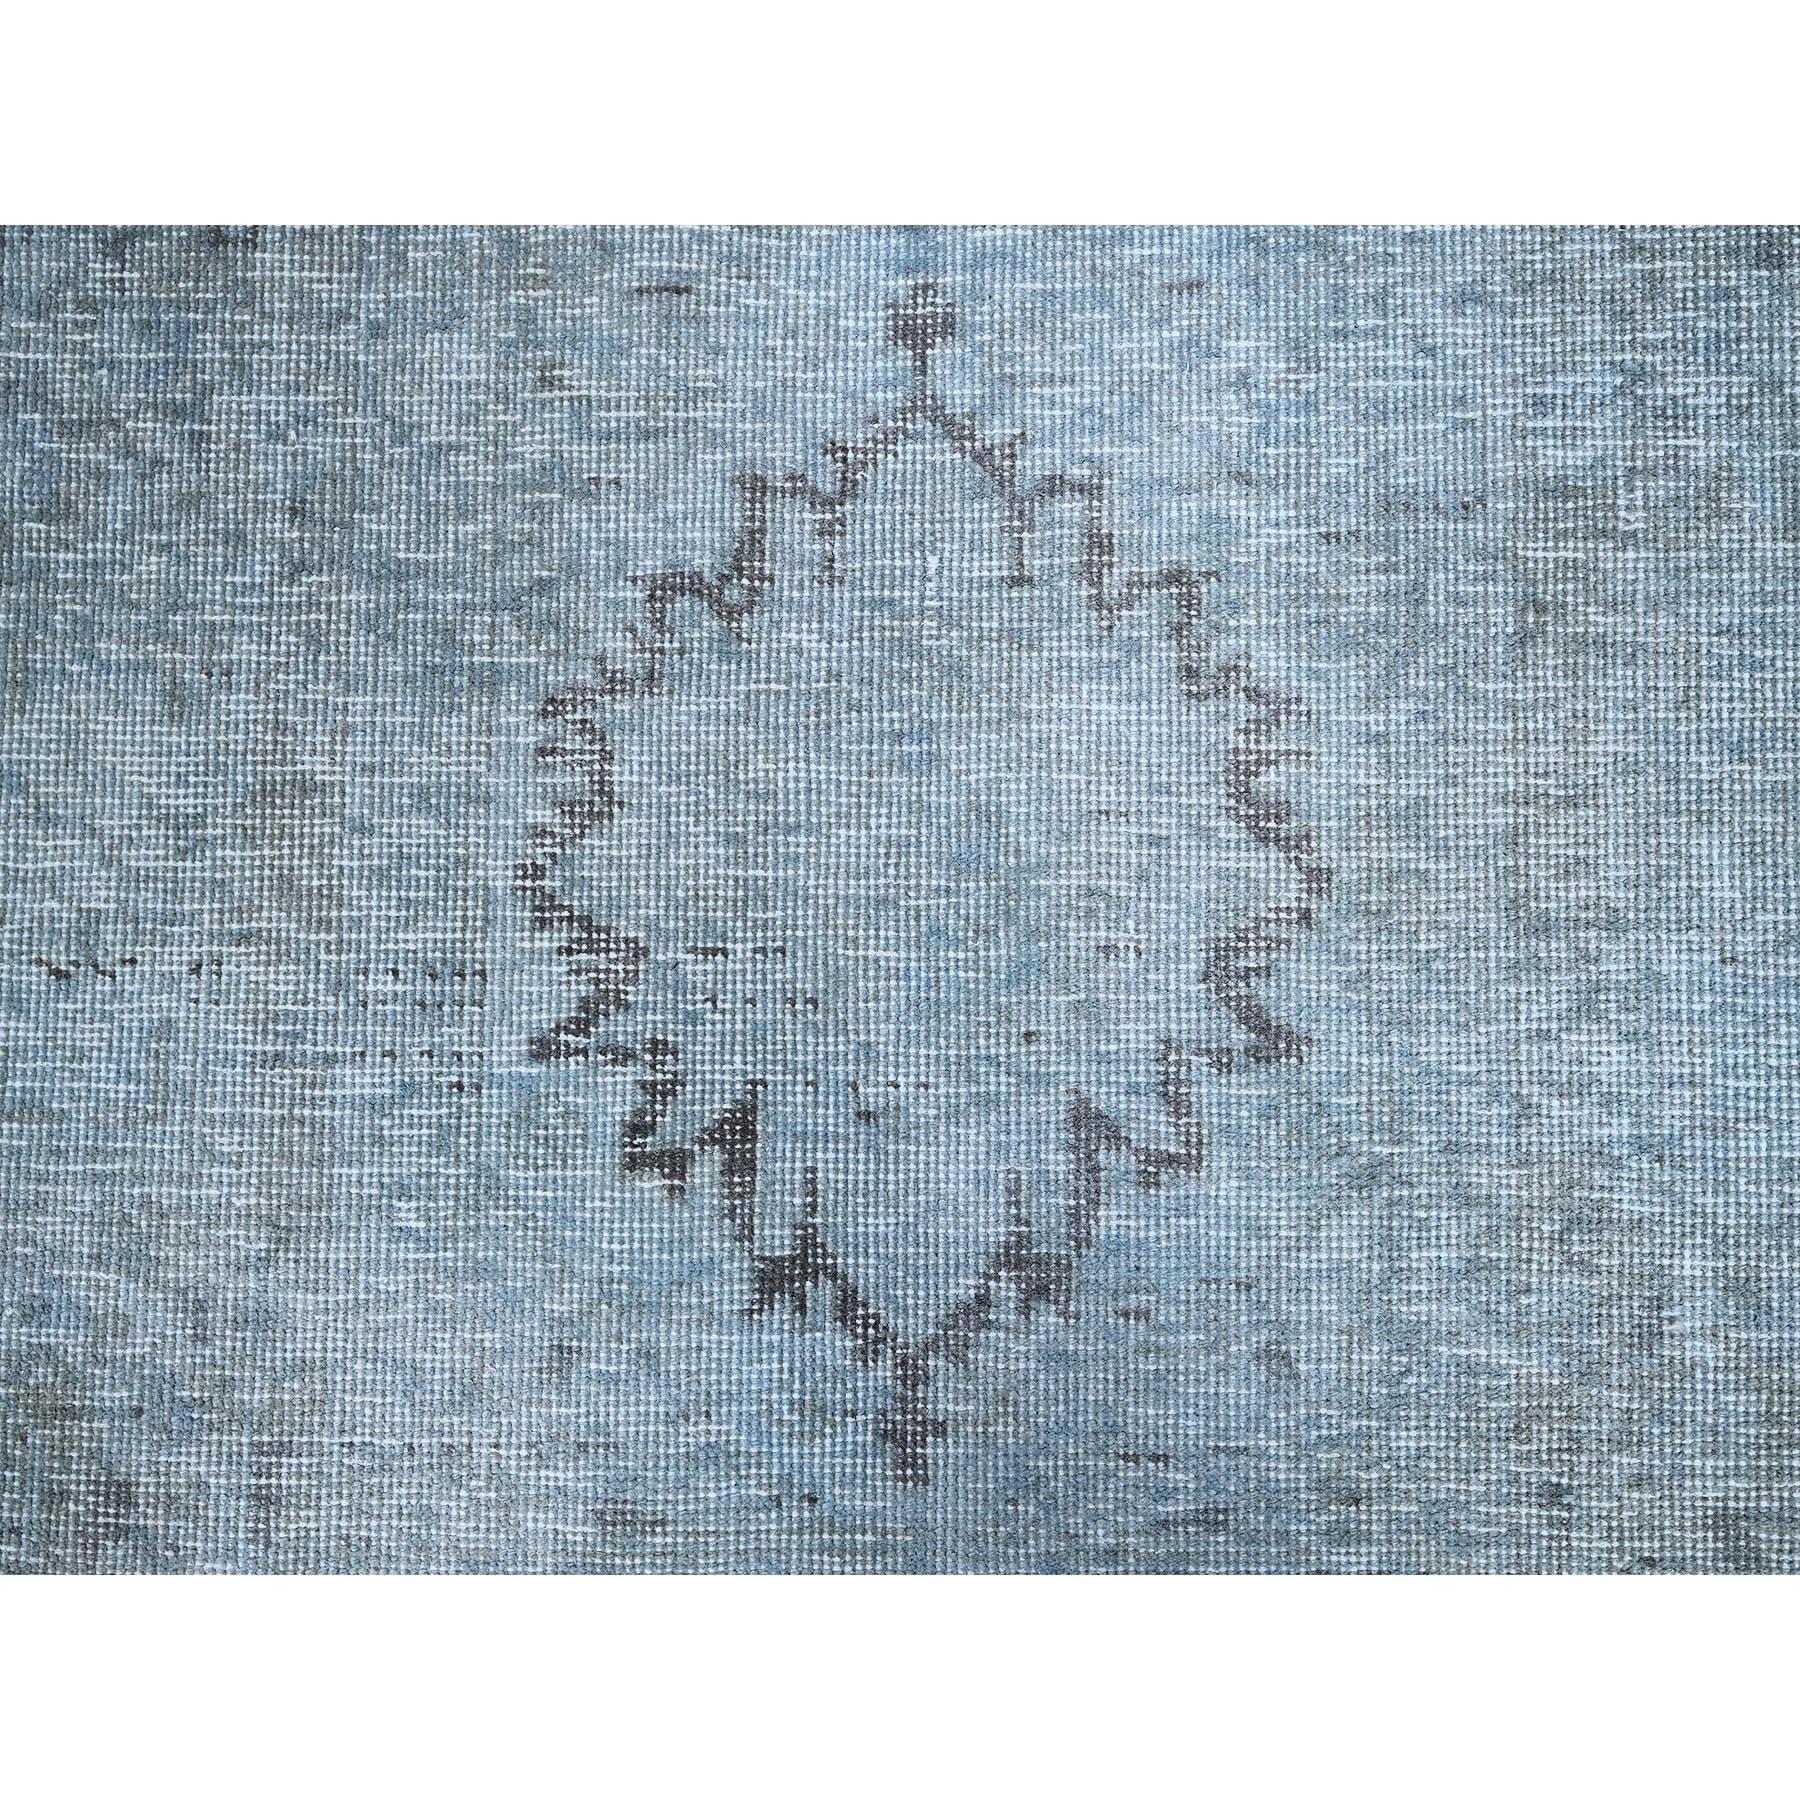 Light Turquoise Overdyed Old Persian Tabriz Rustic Feel Wool Hand Knotted Rug For Sale 4